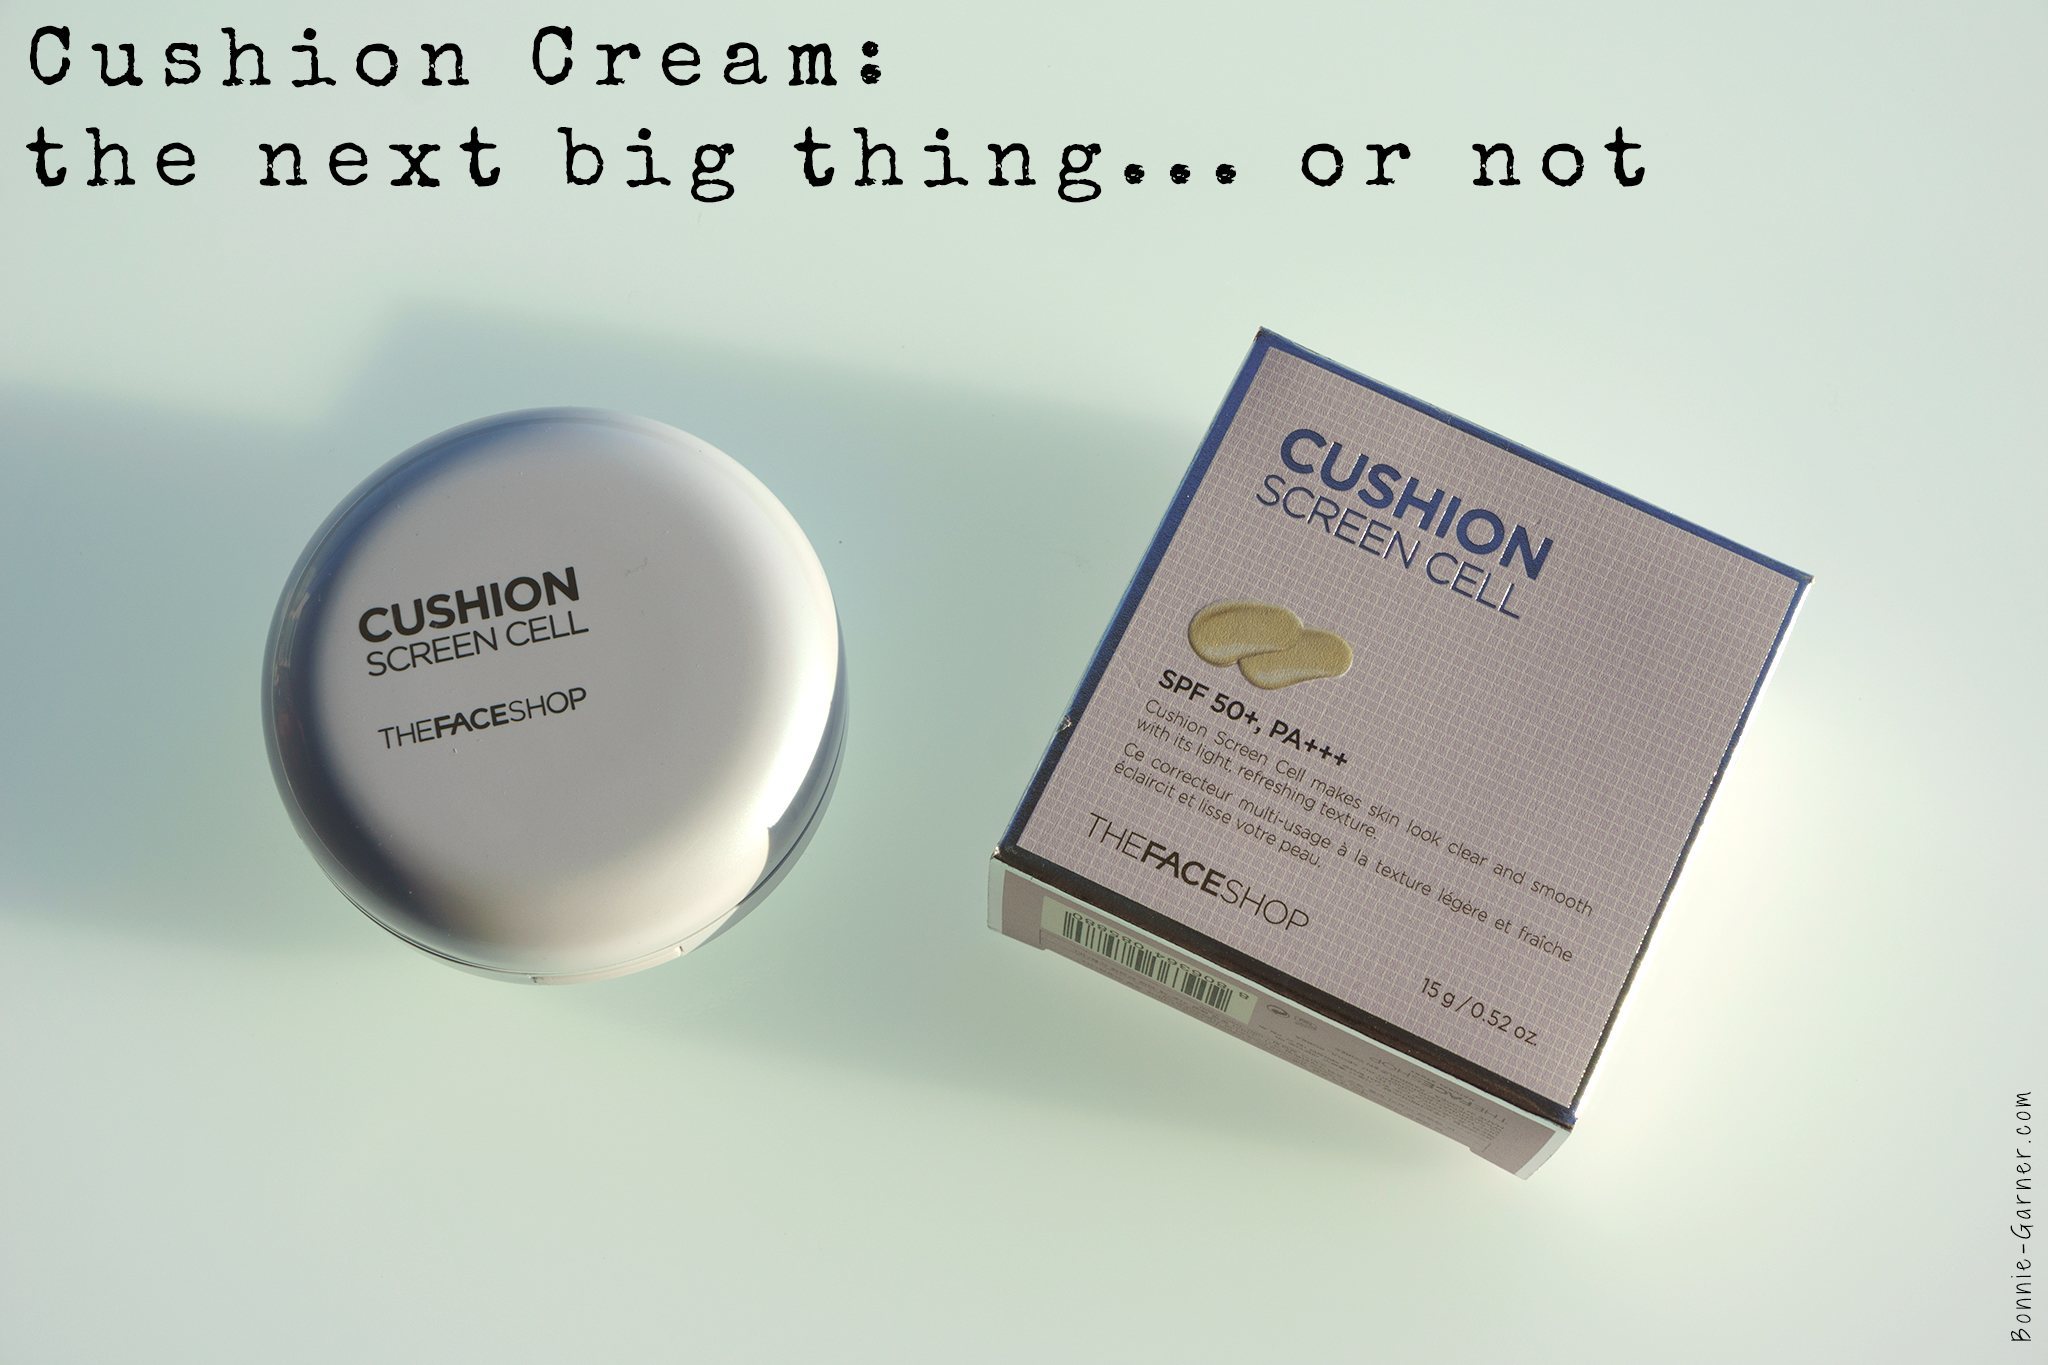 Cushion Cream: the next big thing... or not